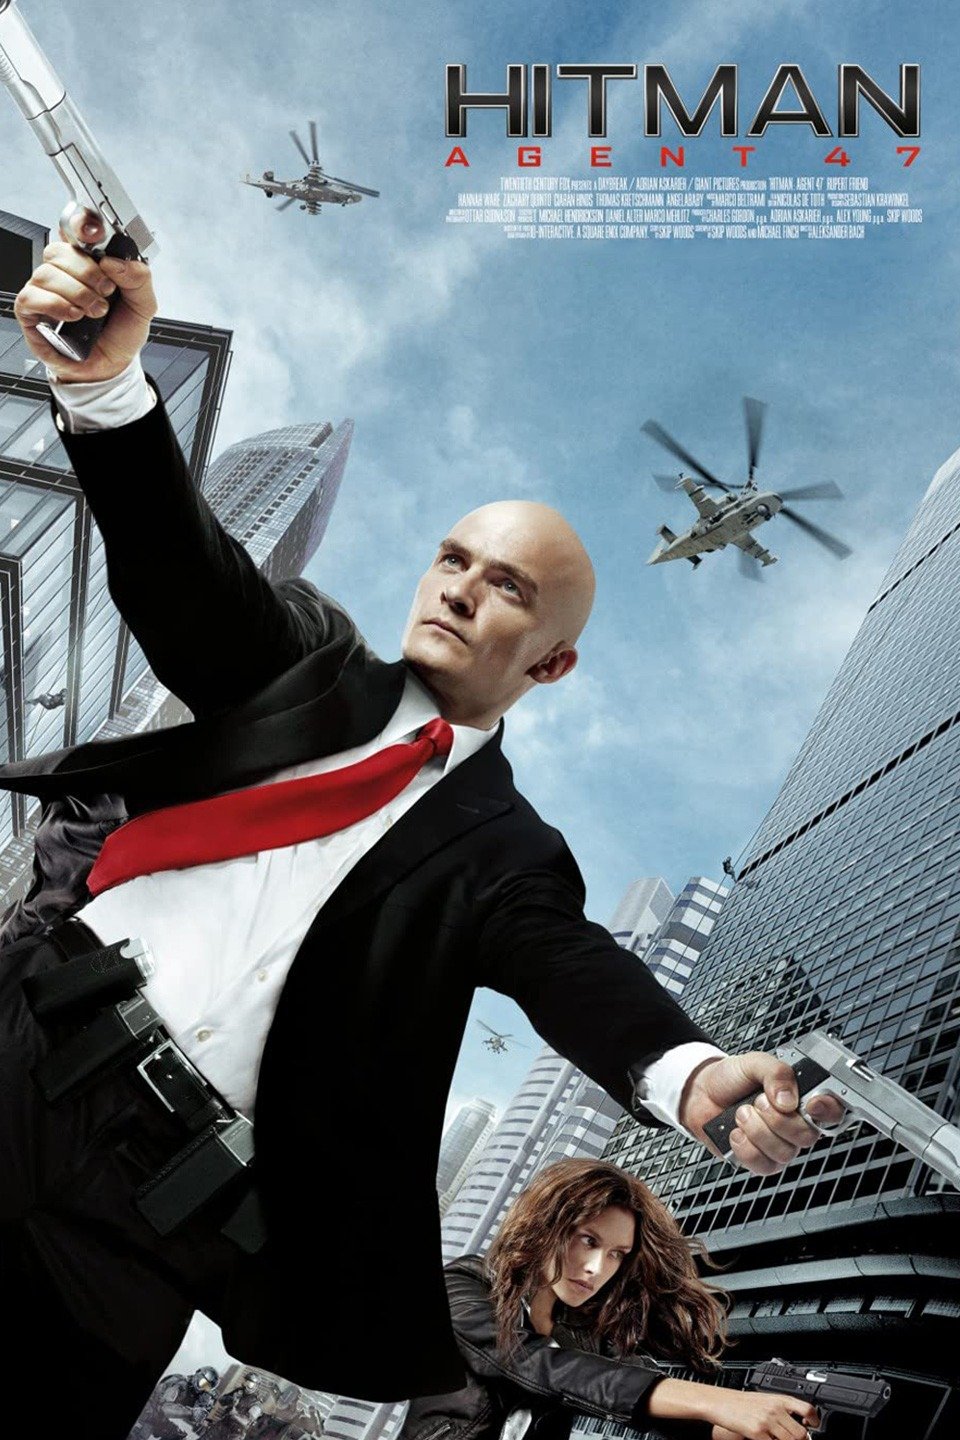 Hitman Agent 47 Trailer His Name is 47 Trailers & Videos Rotten